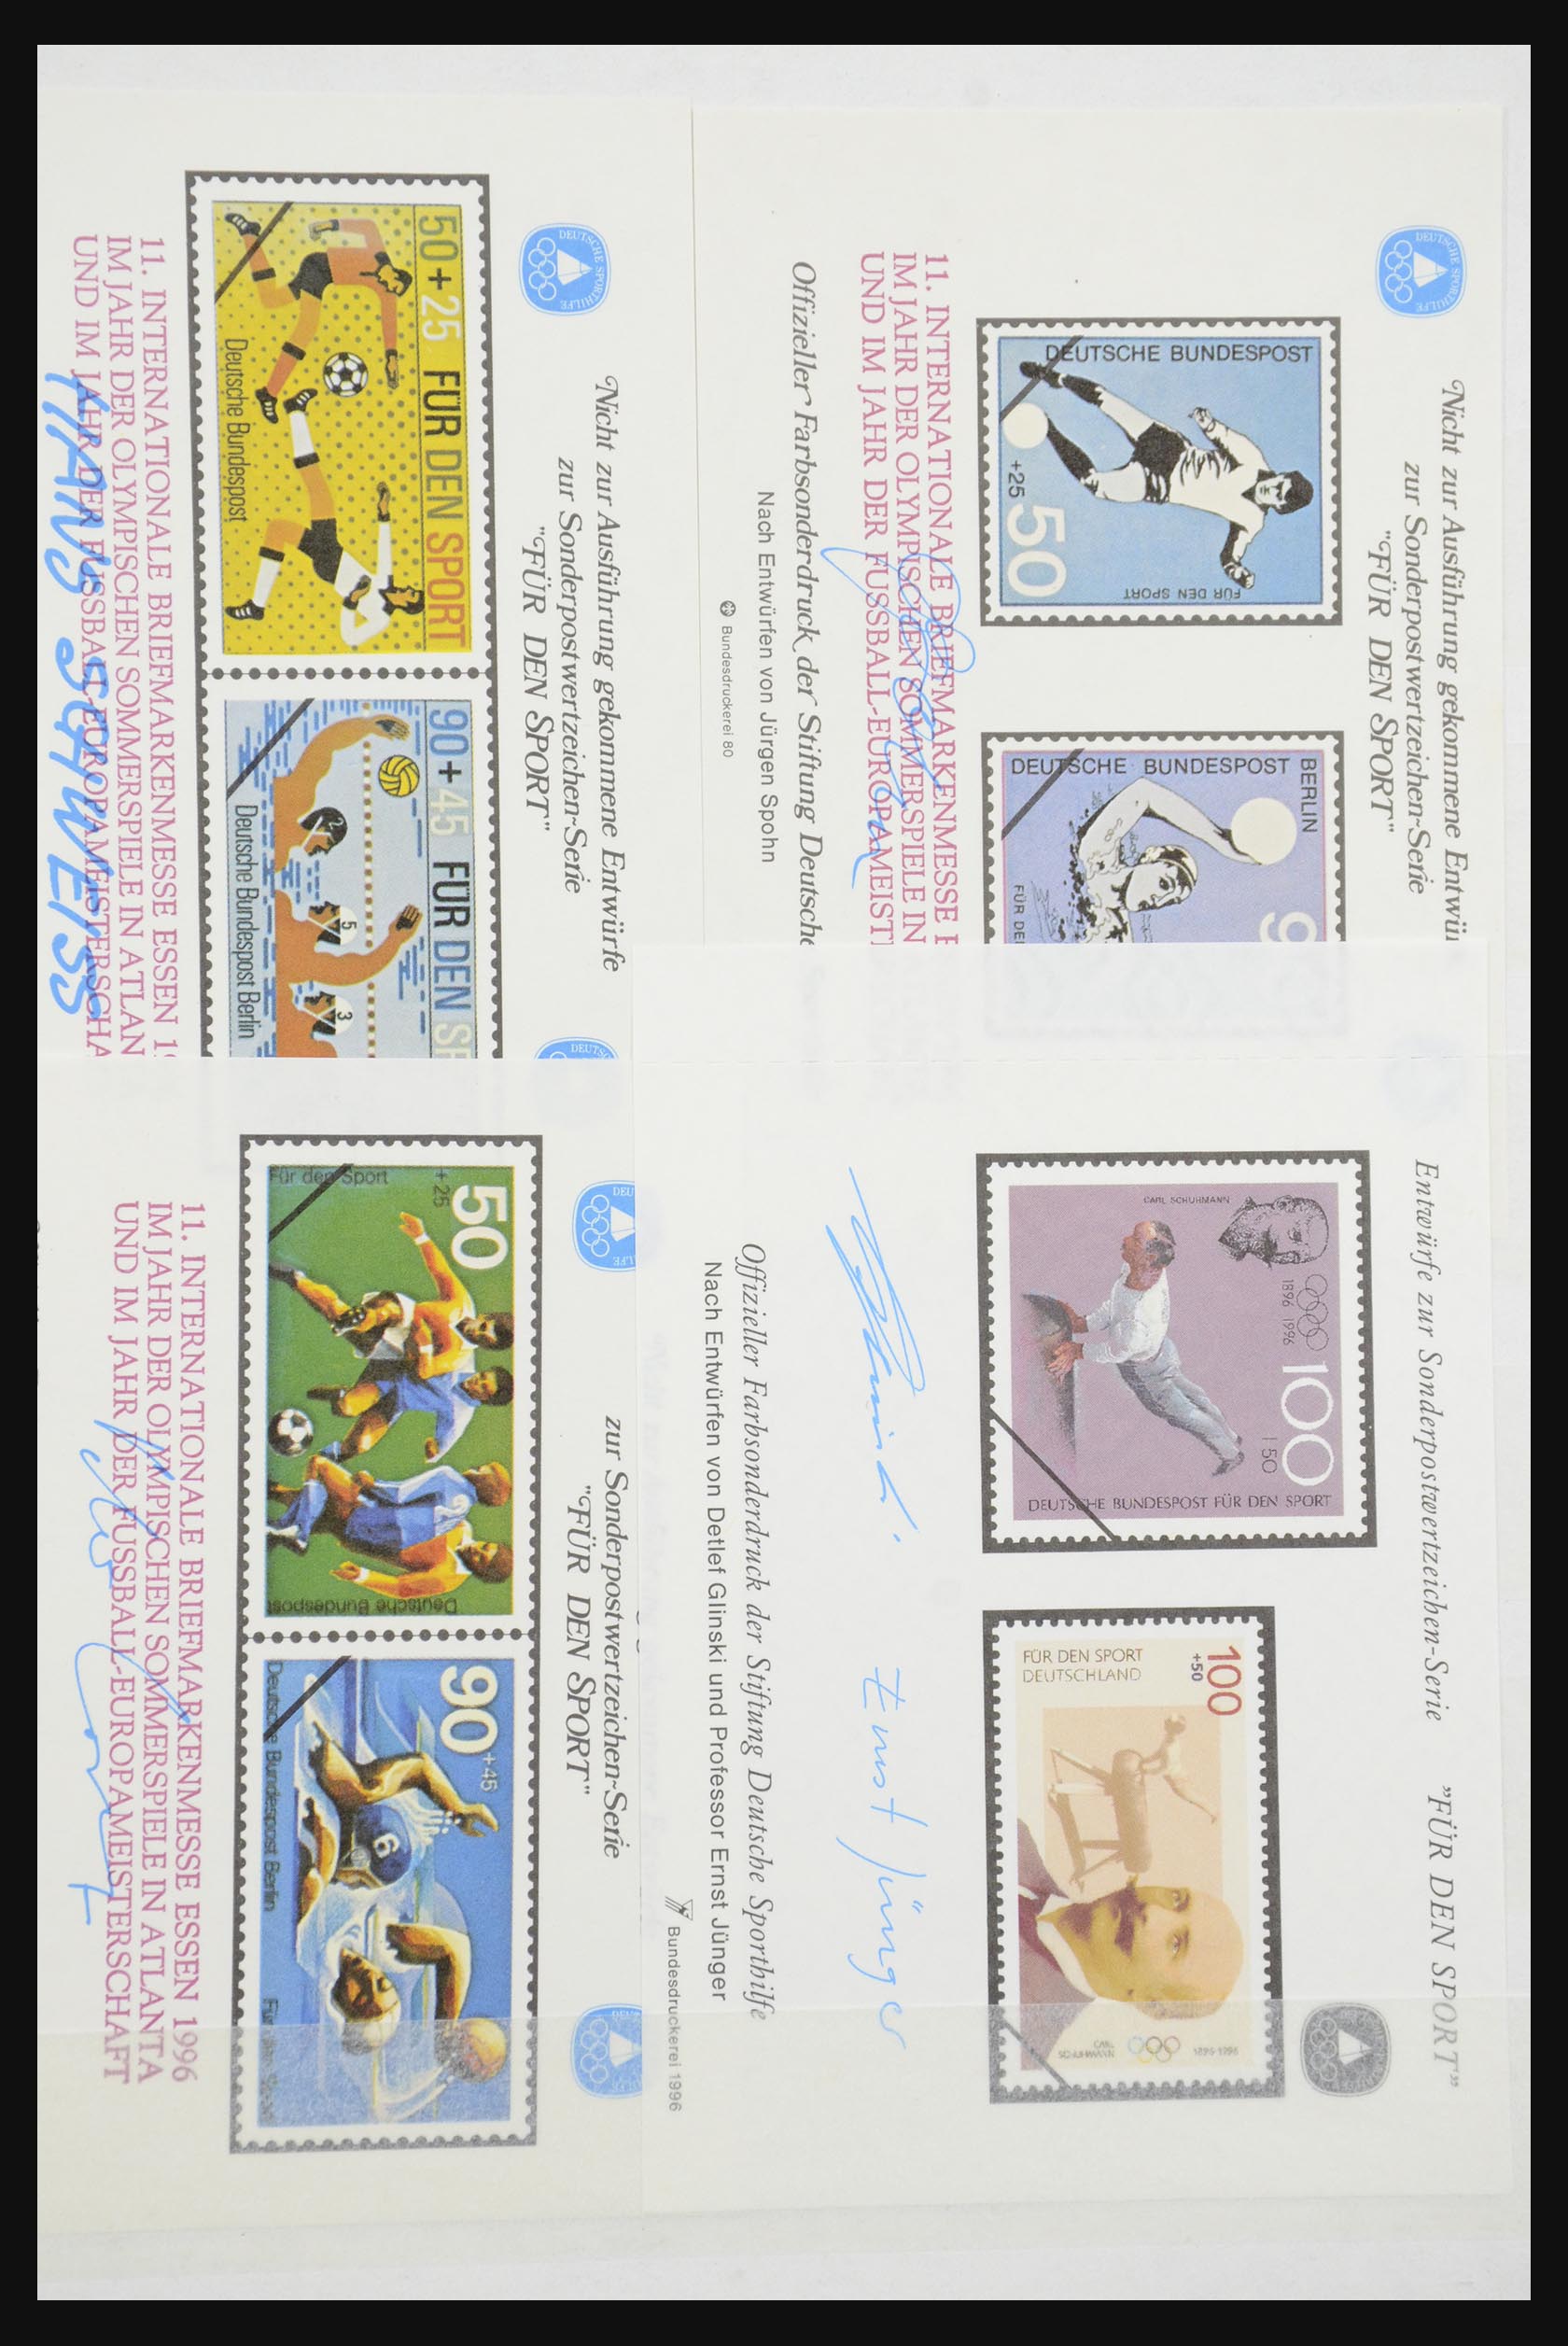 32050 053 - 32050 Bundespost special sheets 1980-2010.